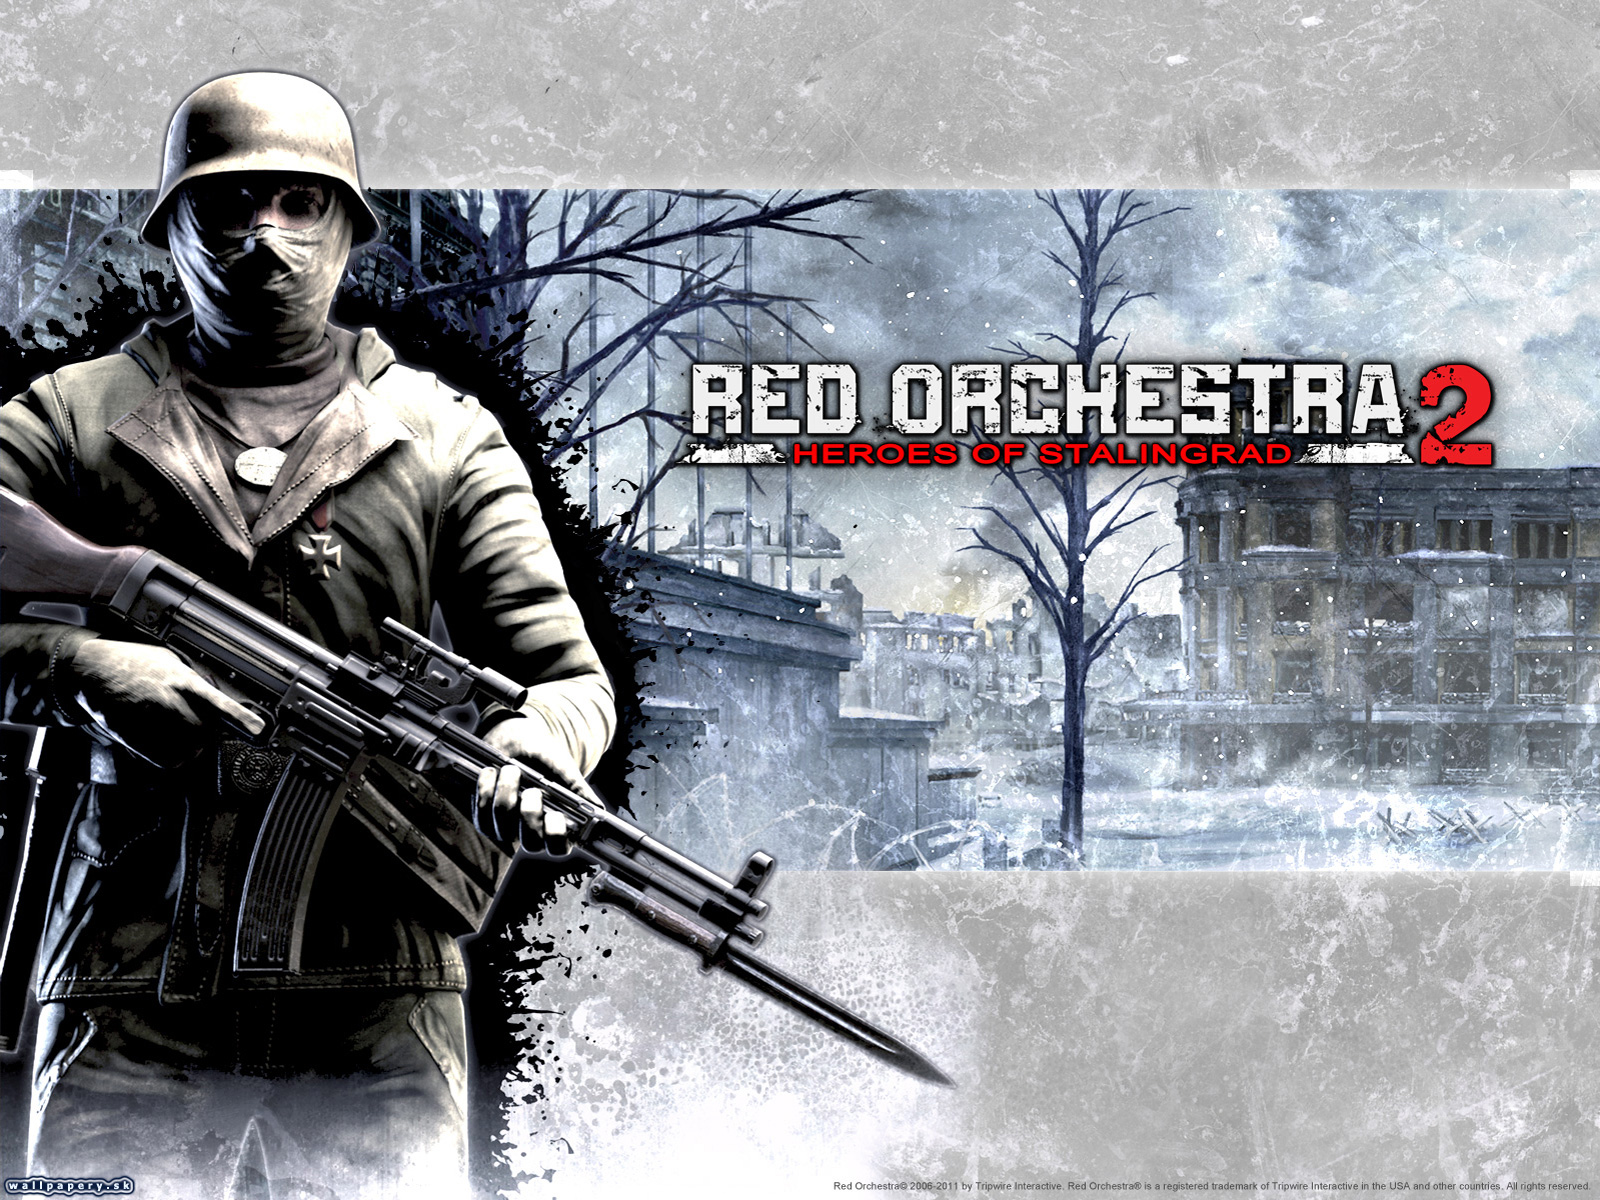 Red Orchestra 2: Heroes of Stalingrad - wallpaper 2